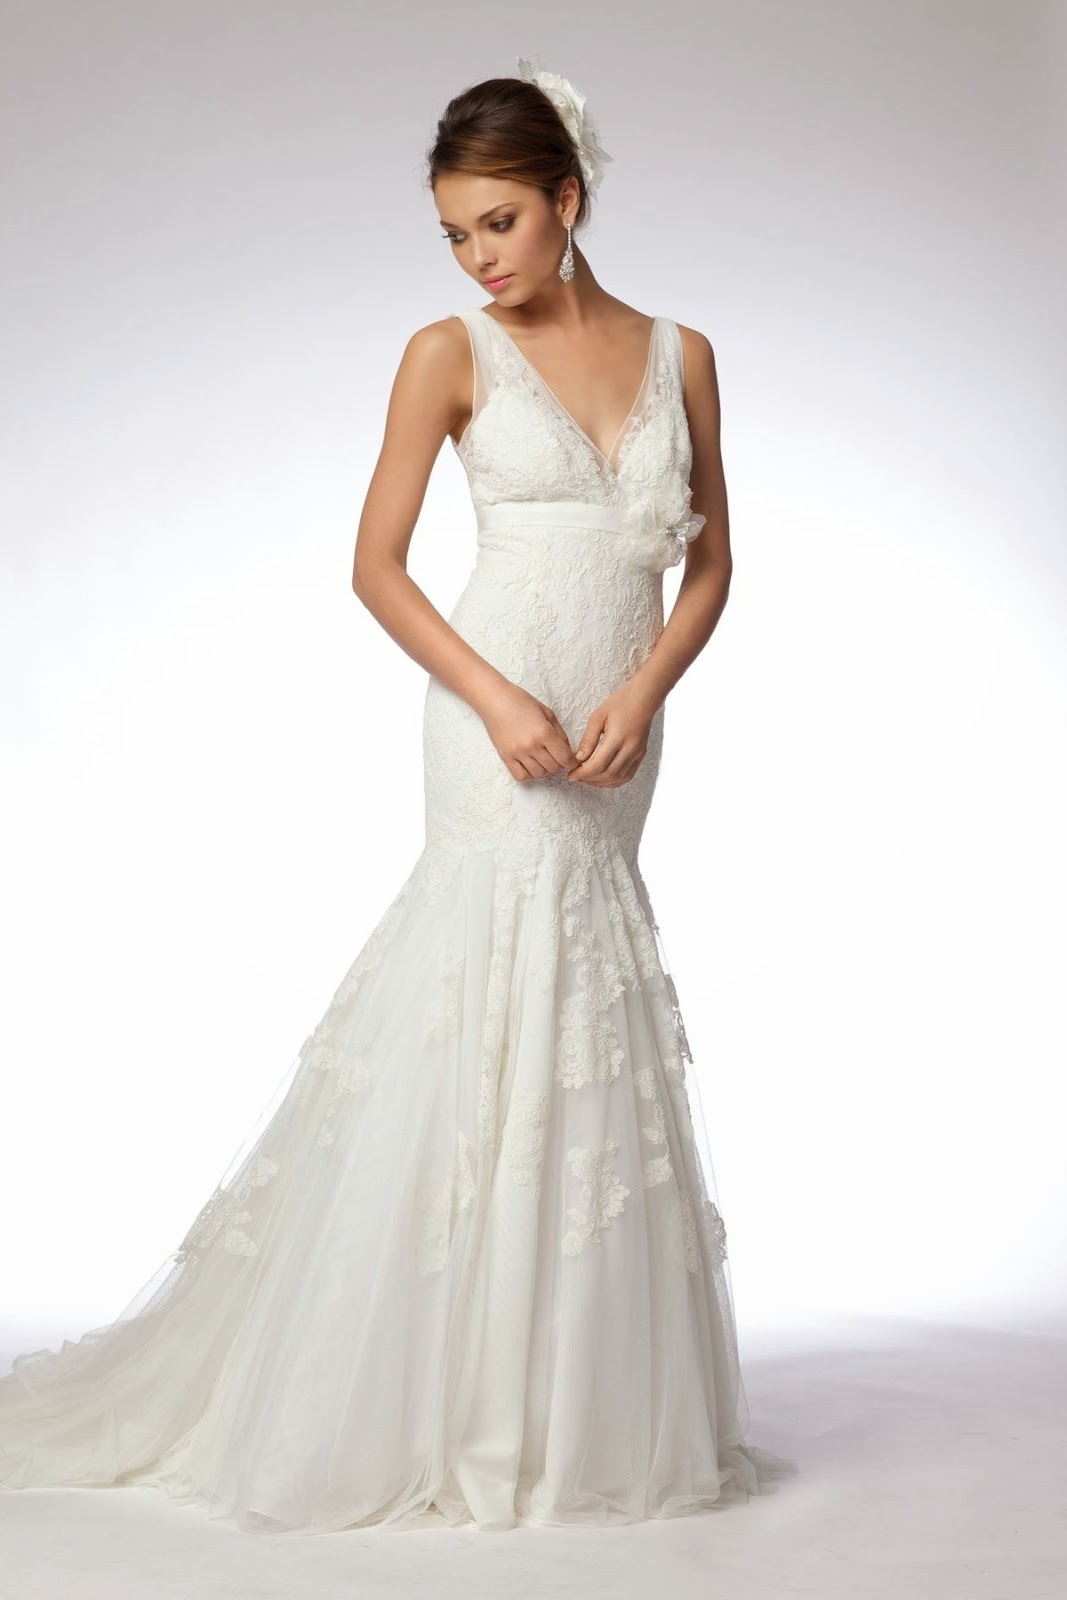 Memorable Wedding: Spring Wedding Dresses And Accessories - The